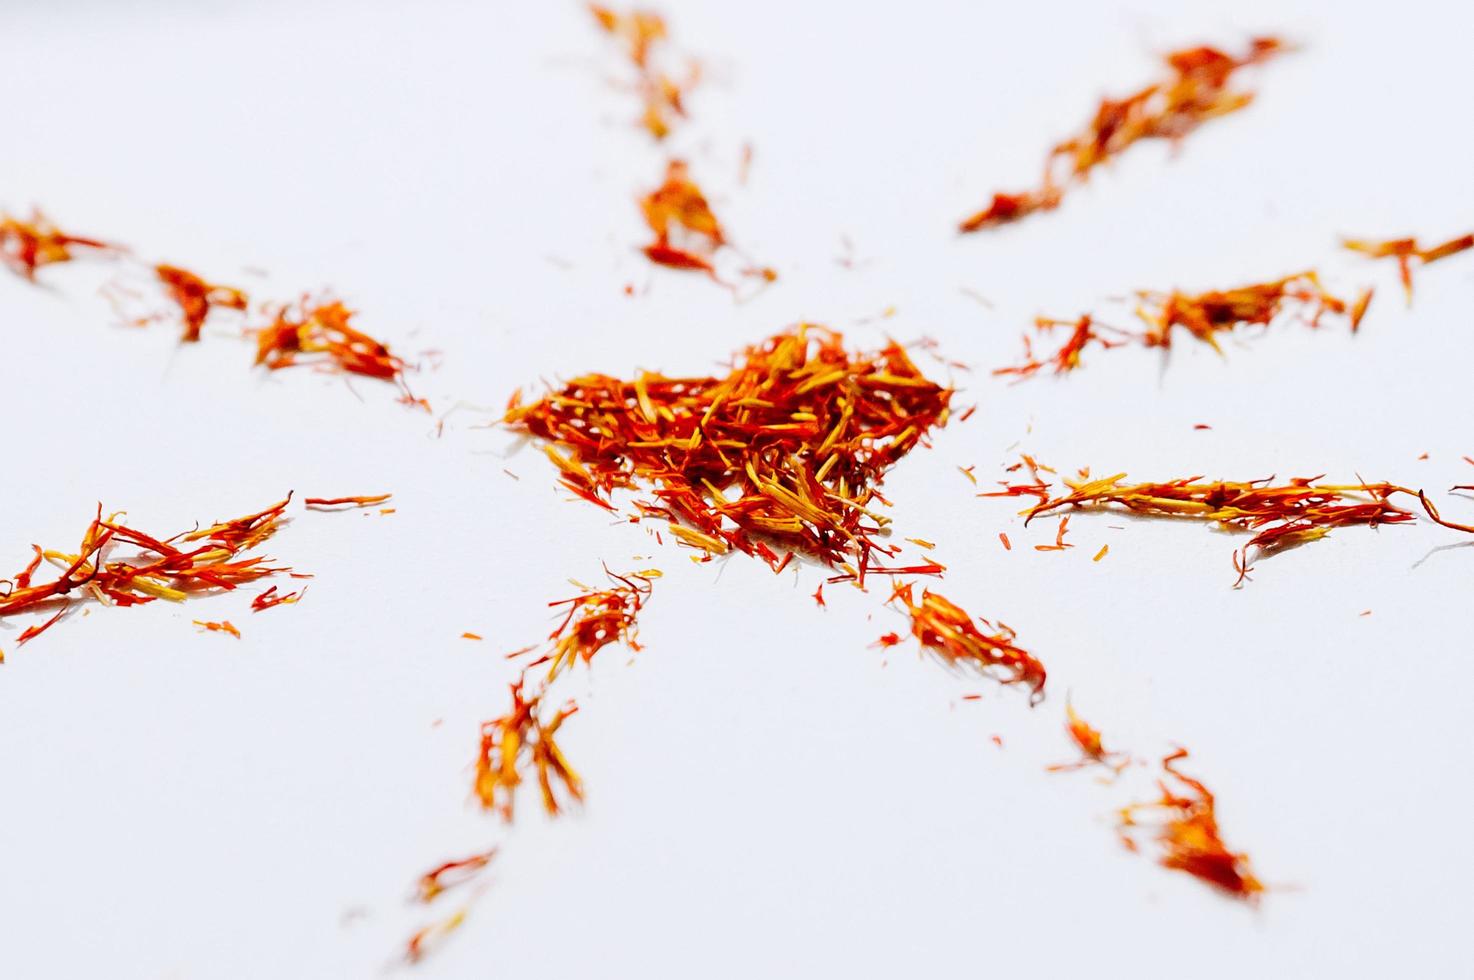 Selective focus close up Red Saffron in shape of mandala with heart on white background. Delicate flower threads. Natural healthy spice. For cafe menu or catalog photo